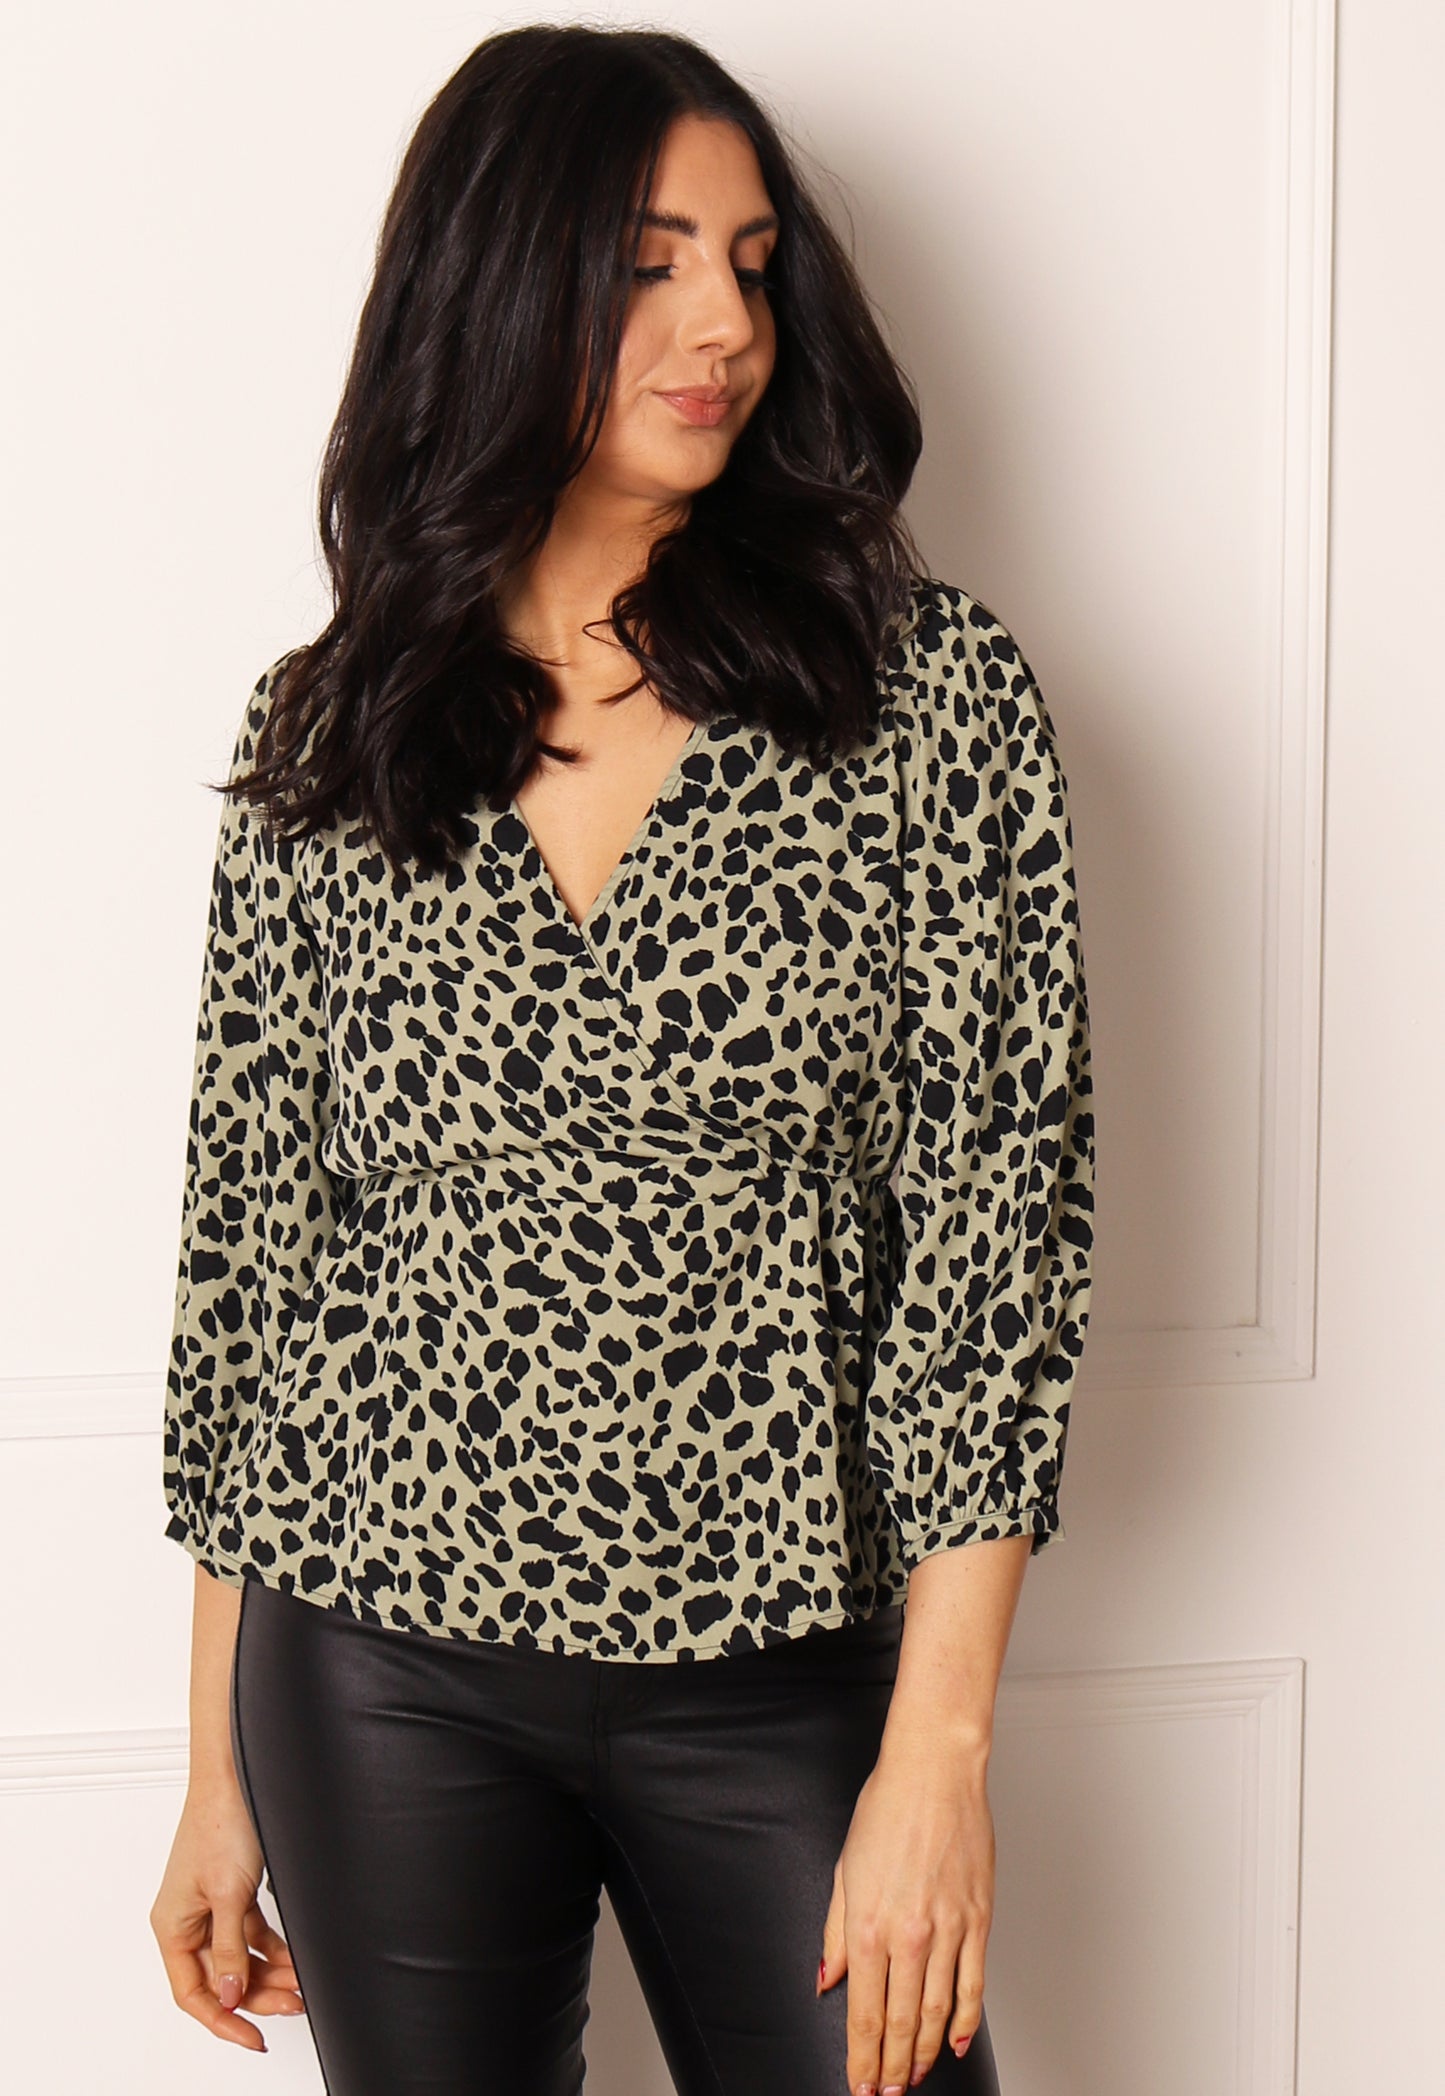 ONLY Sumi Leopard Print Wrap Top with Three Quarter Sleeves in Green & Black - One Nation Clothing